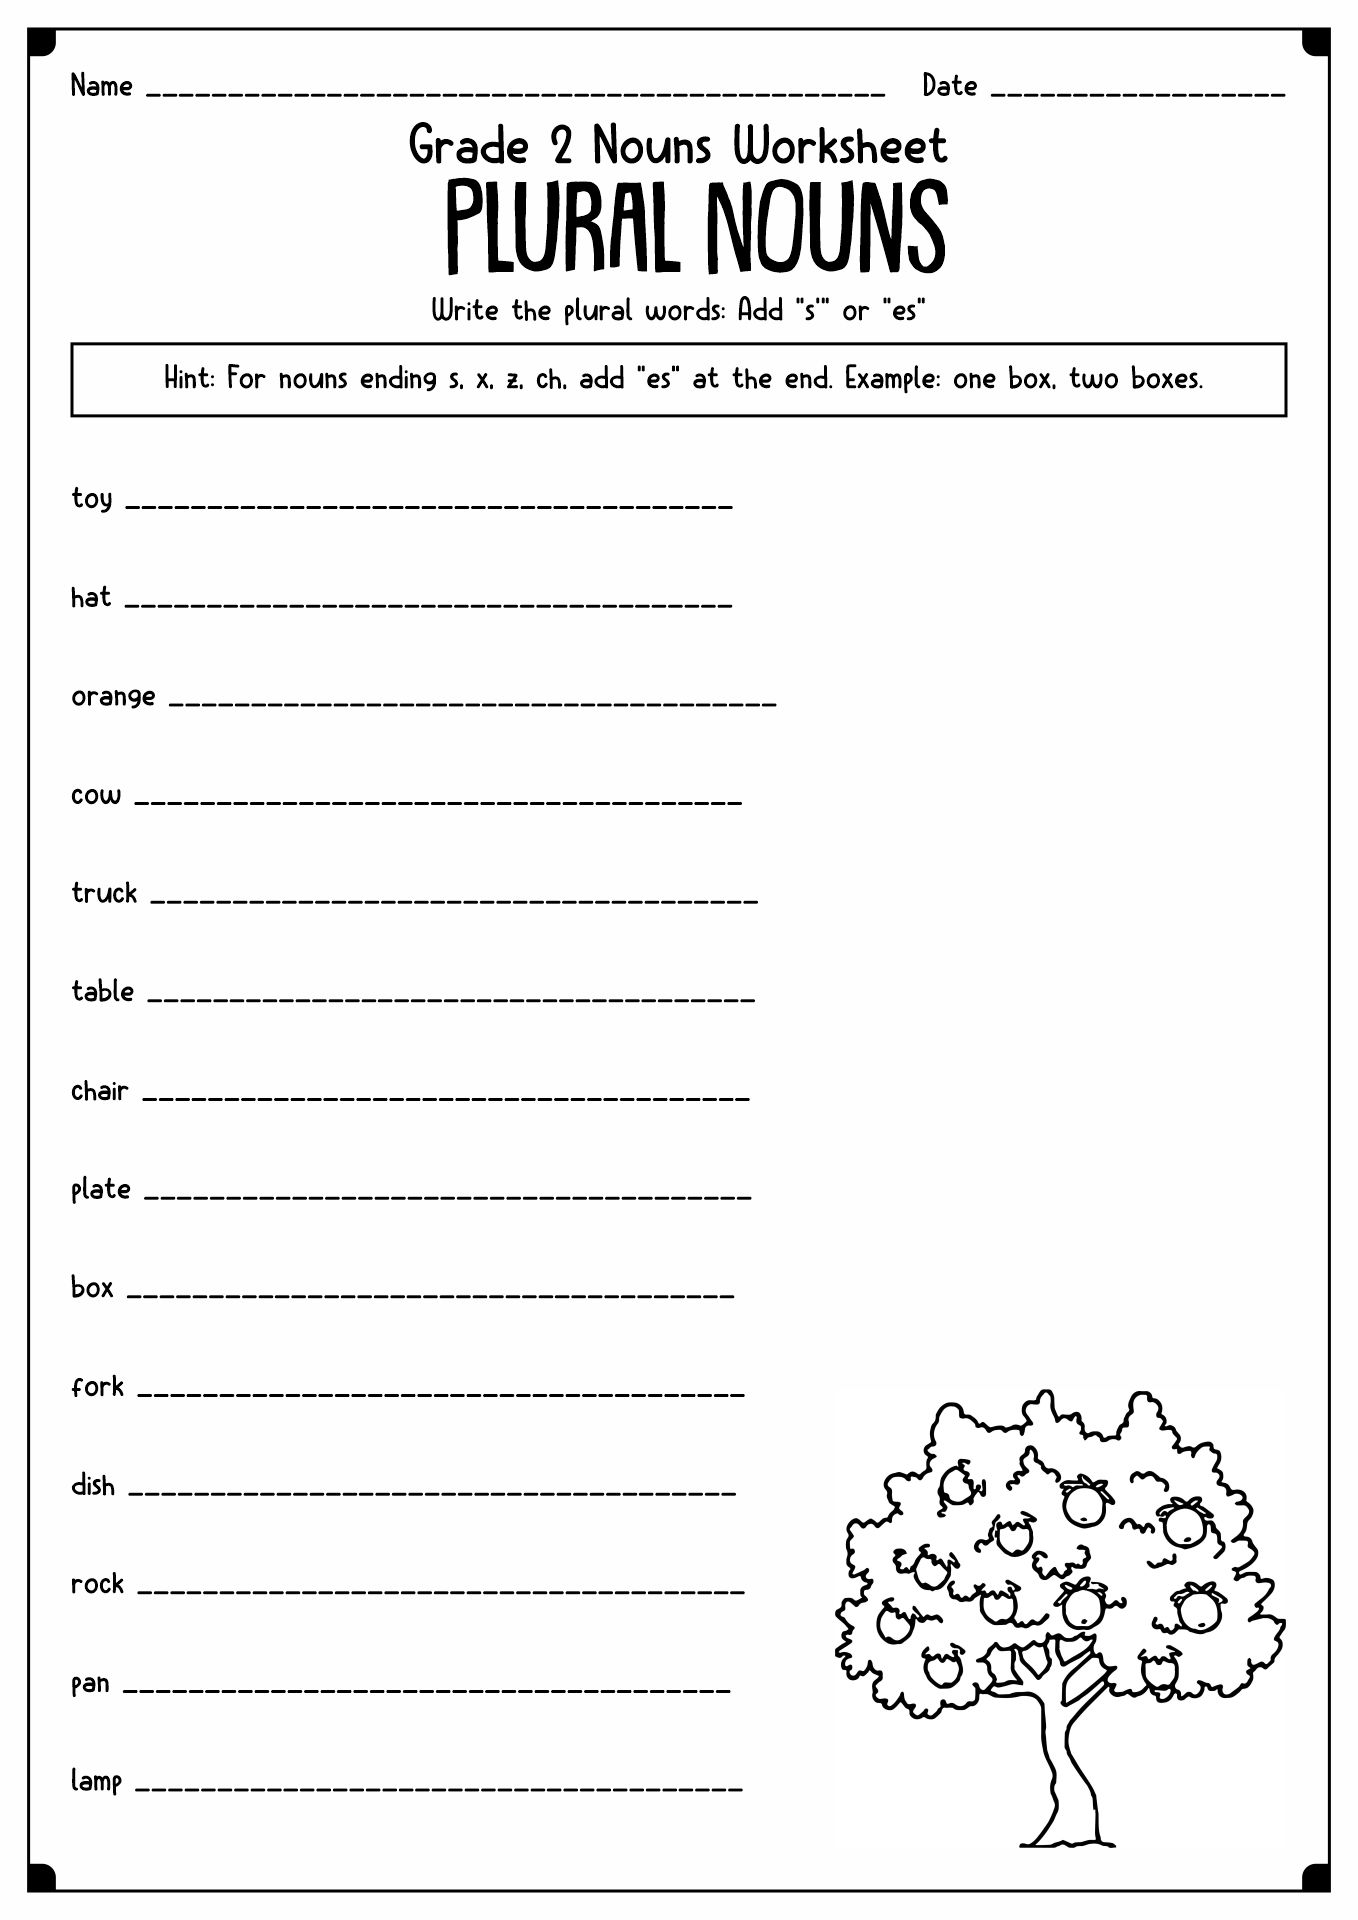 18 Best Images Of Proper Noun Worksheets For First Grade Common And Proper Nouns Worksheets